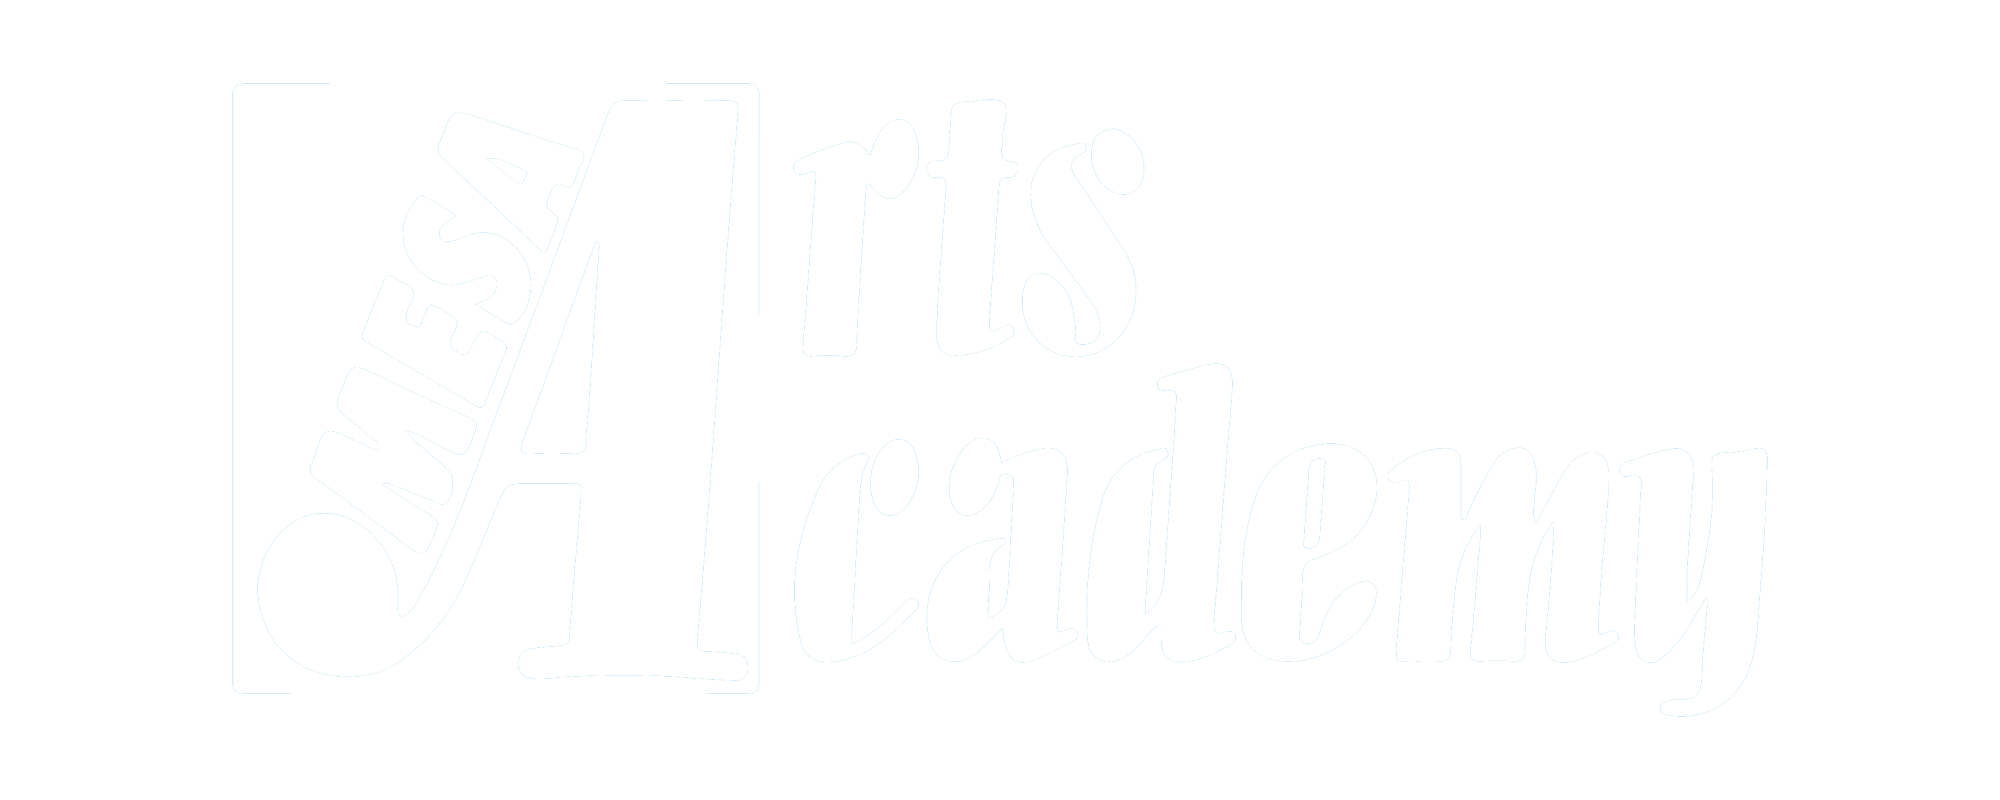 https://www.mesaartsacademy.org/wp-content/uploads/2022/09/cropped-Mesa-Arts-Academy-Logo-White-2000x800-1.png